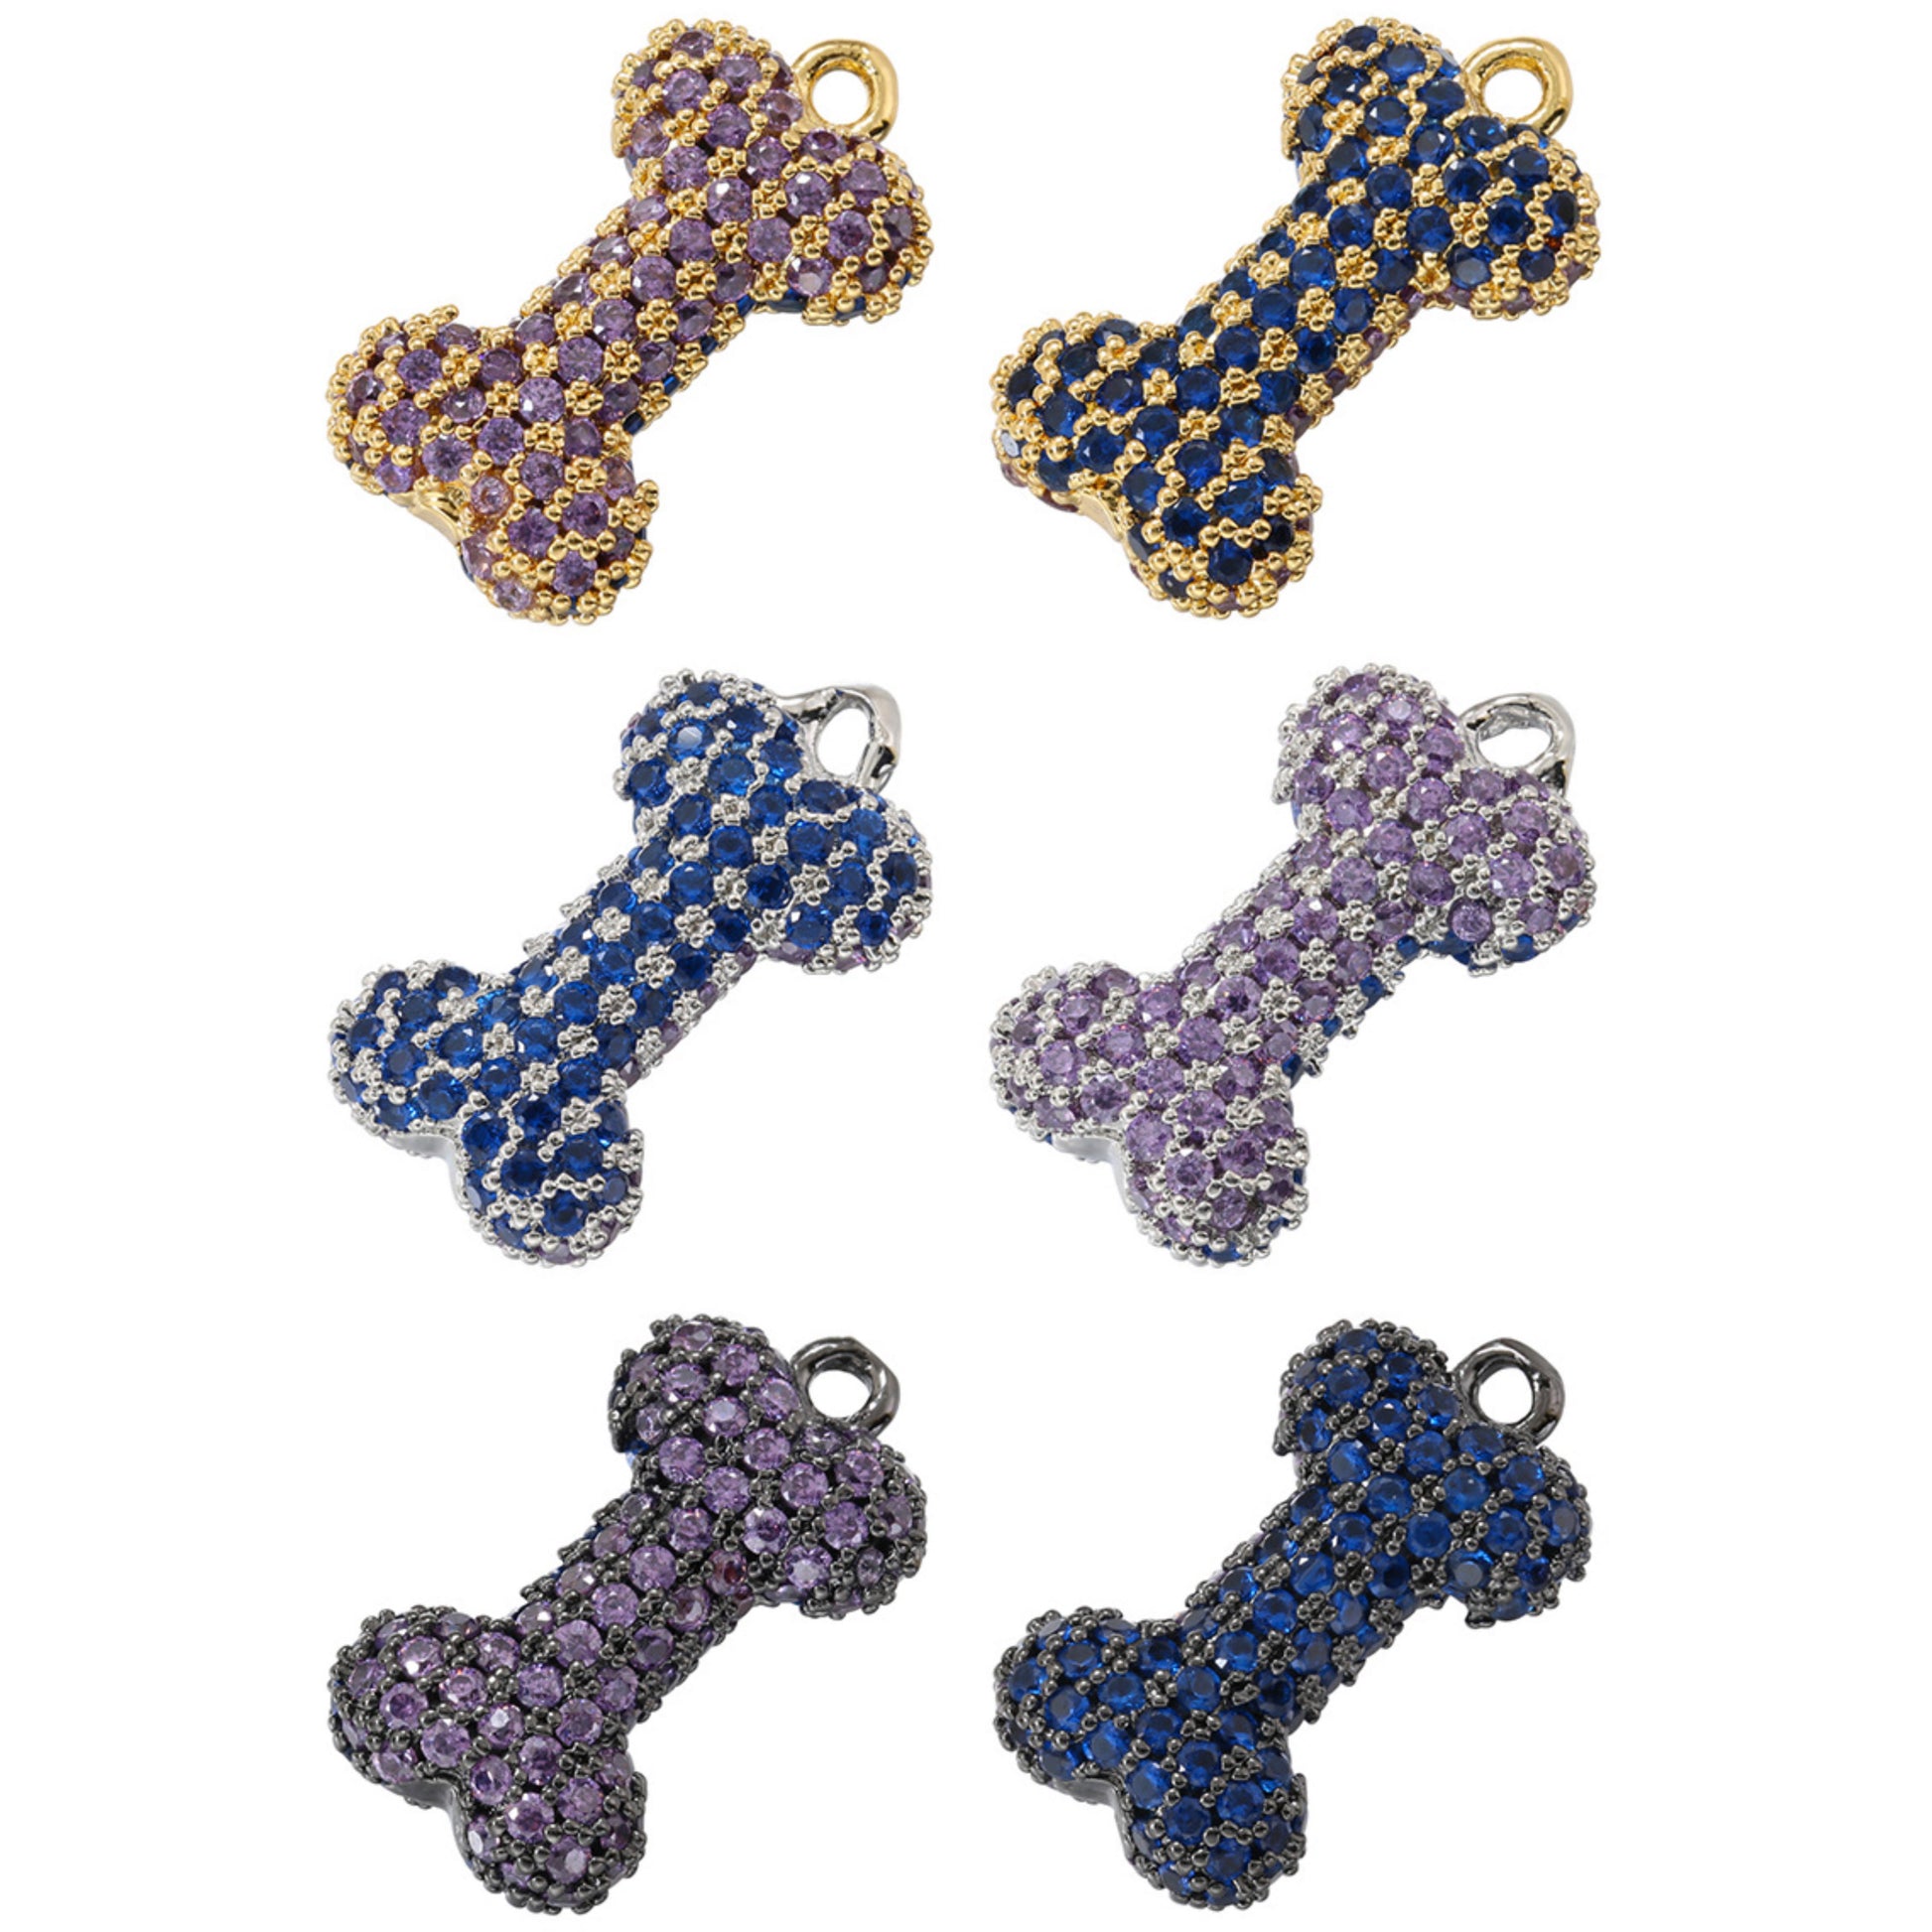 10pcs/lot Colorful CZ Paved 3D Cute Heart Bone Charms Mix Bones CZ Paved Charms Hearts Small Sizes Charms Beads Beyond